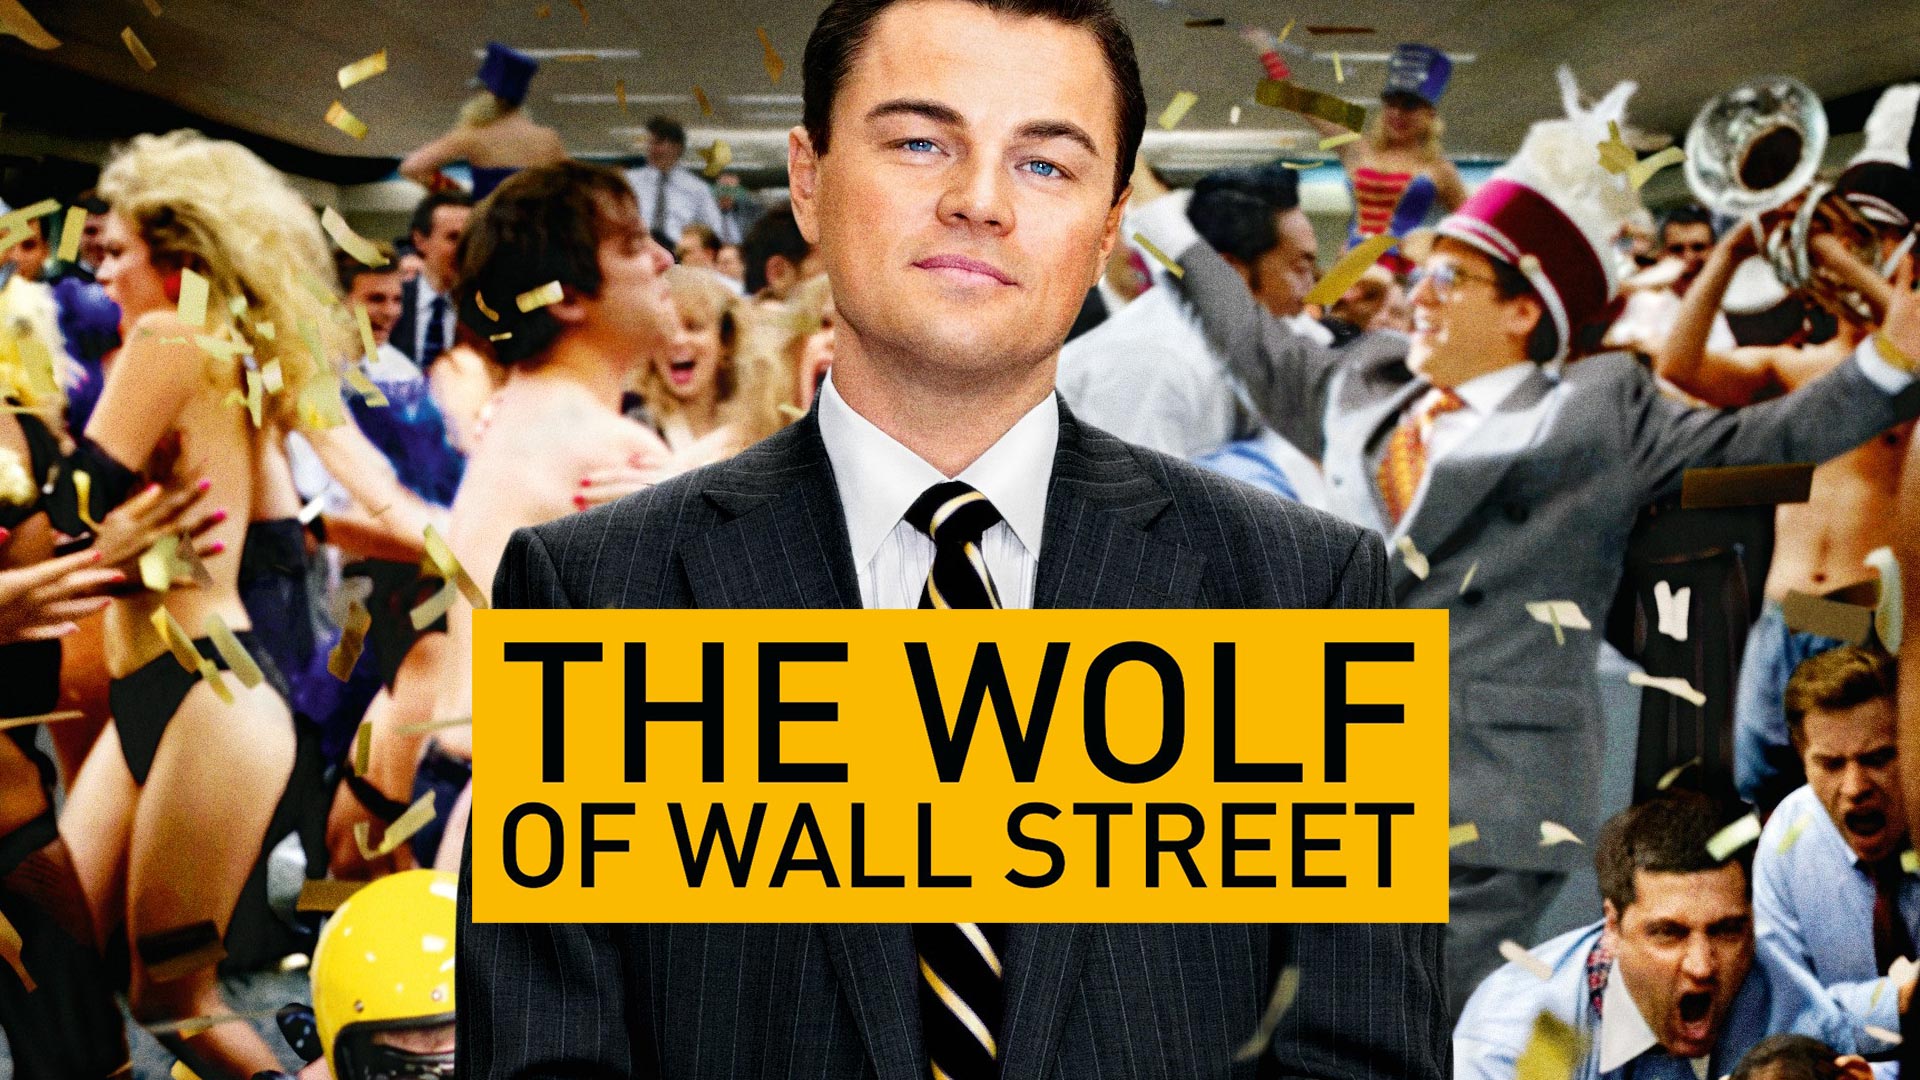 The wolf of wall street full movie unblocked